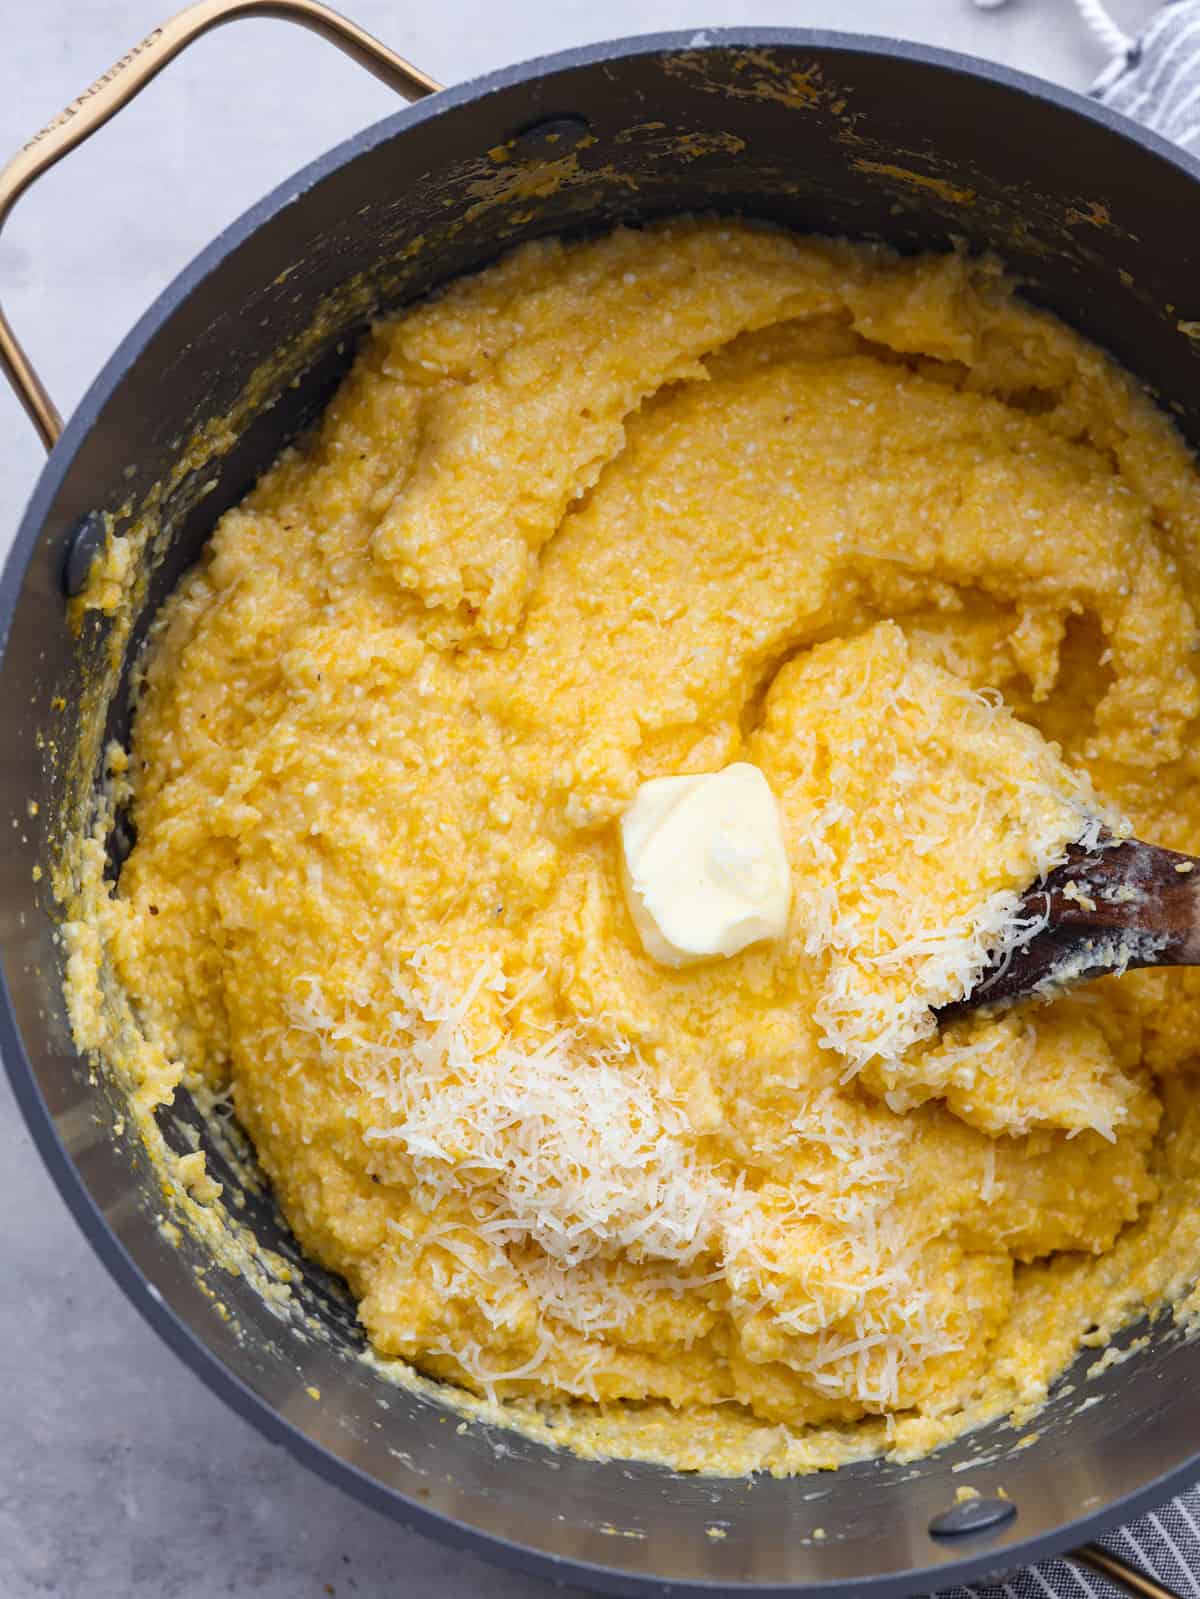 How to cook with polenta